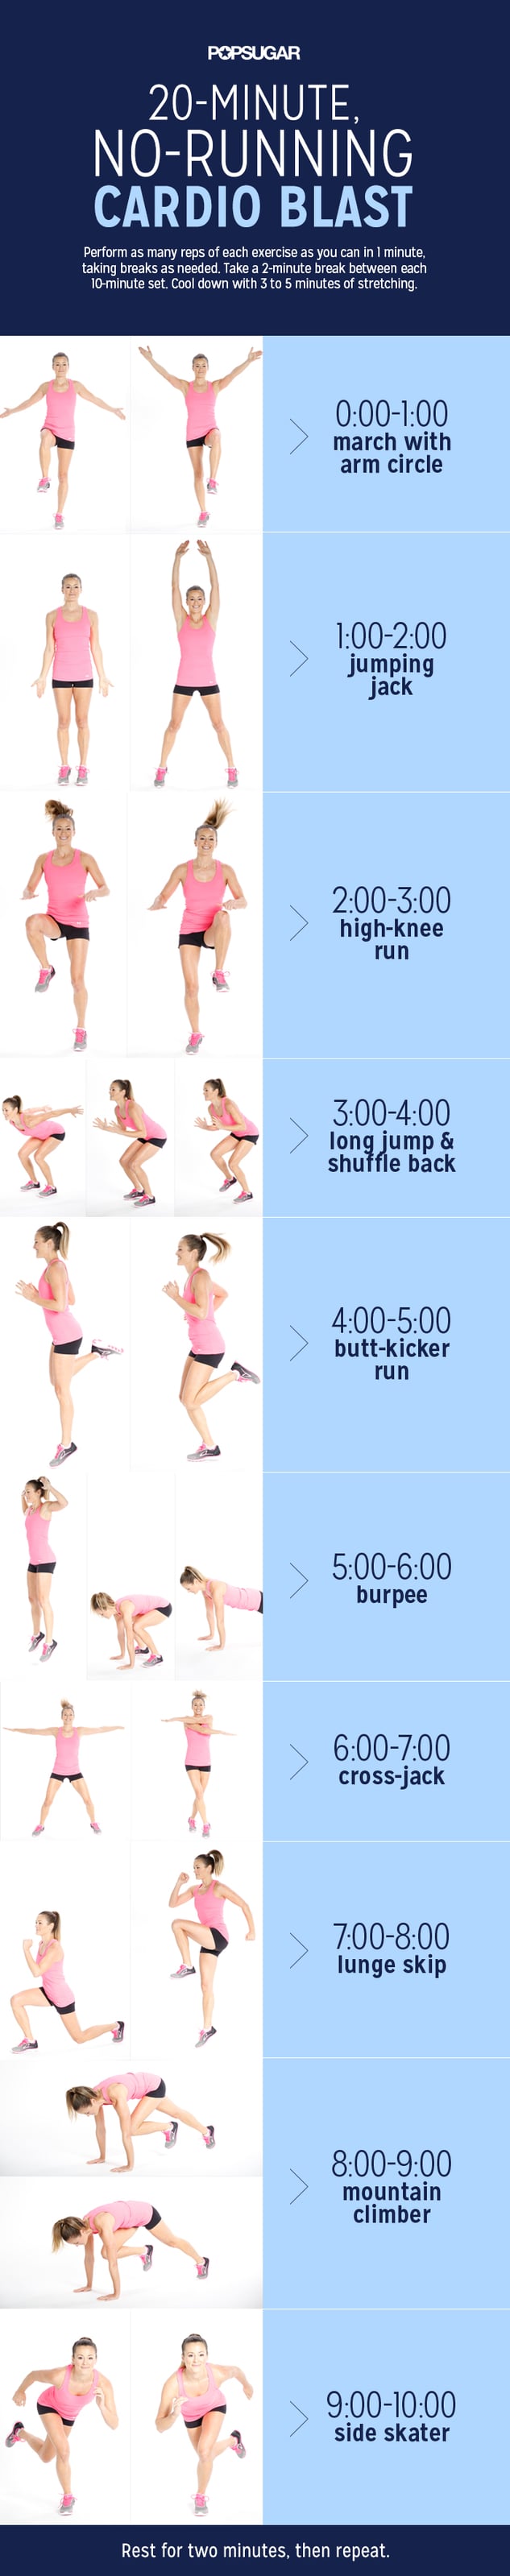 1 Minute Cardio Workout